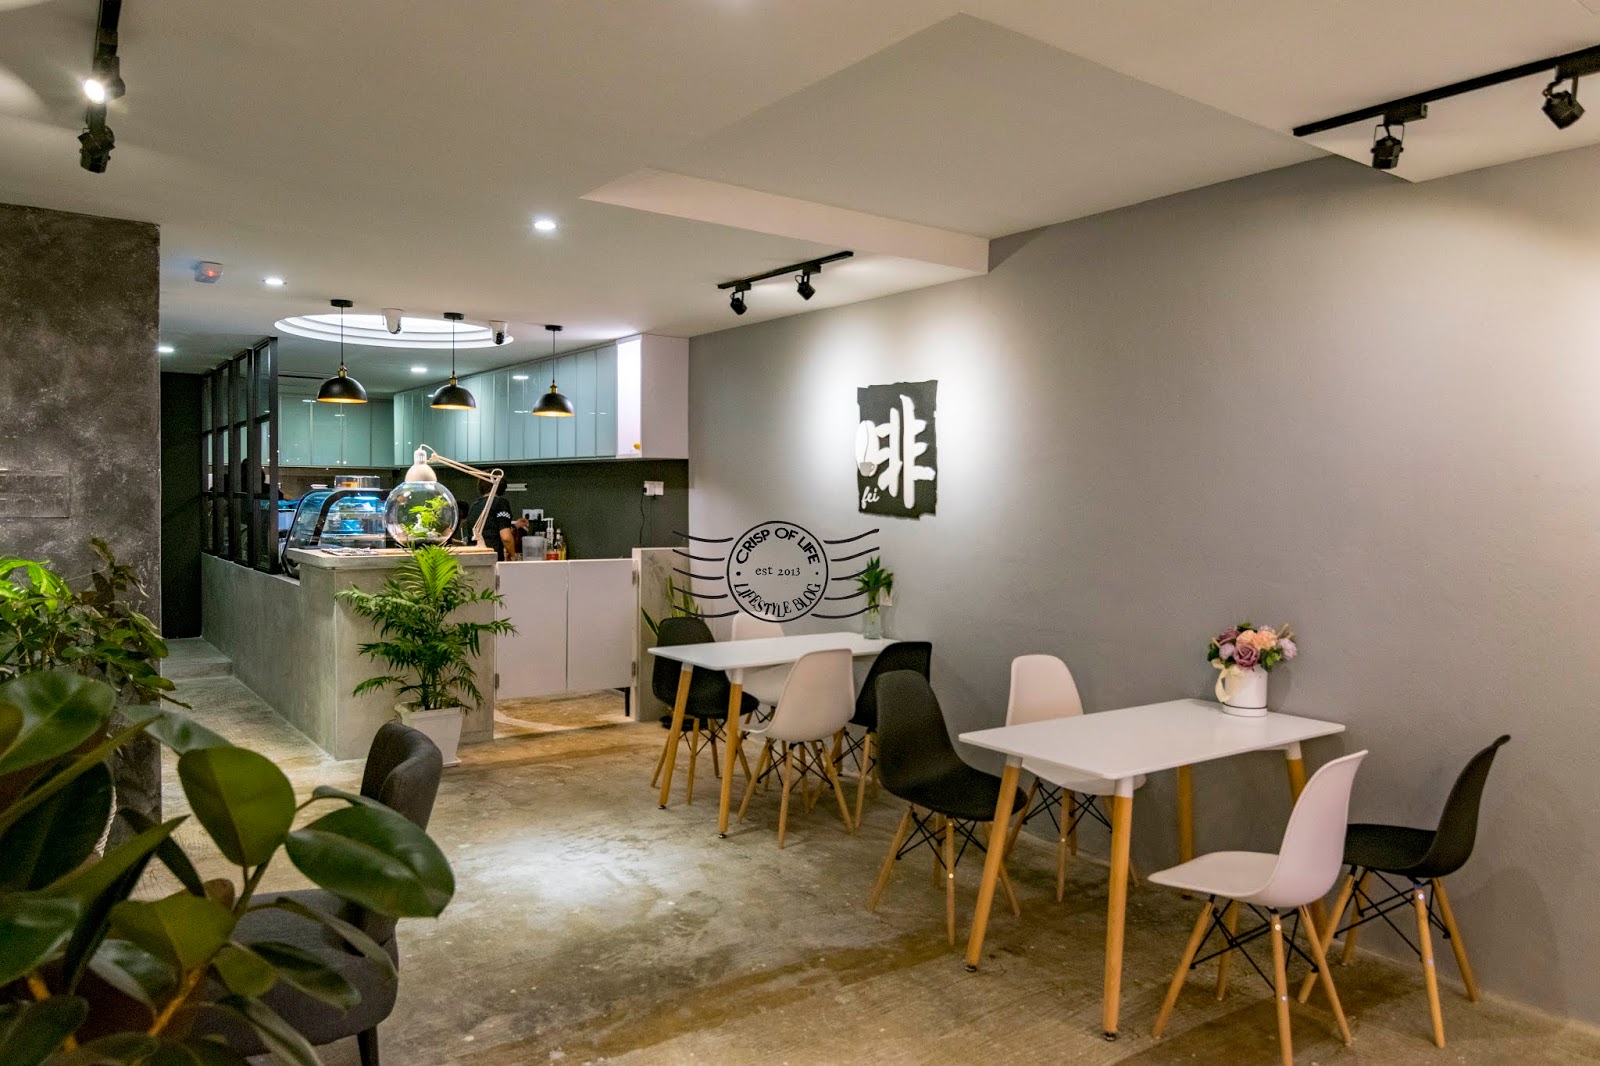 Fei Brew Cafe - The Meatless and Healthy Cafe @ Bayan Point, Penang